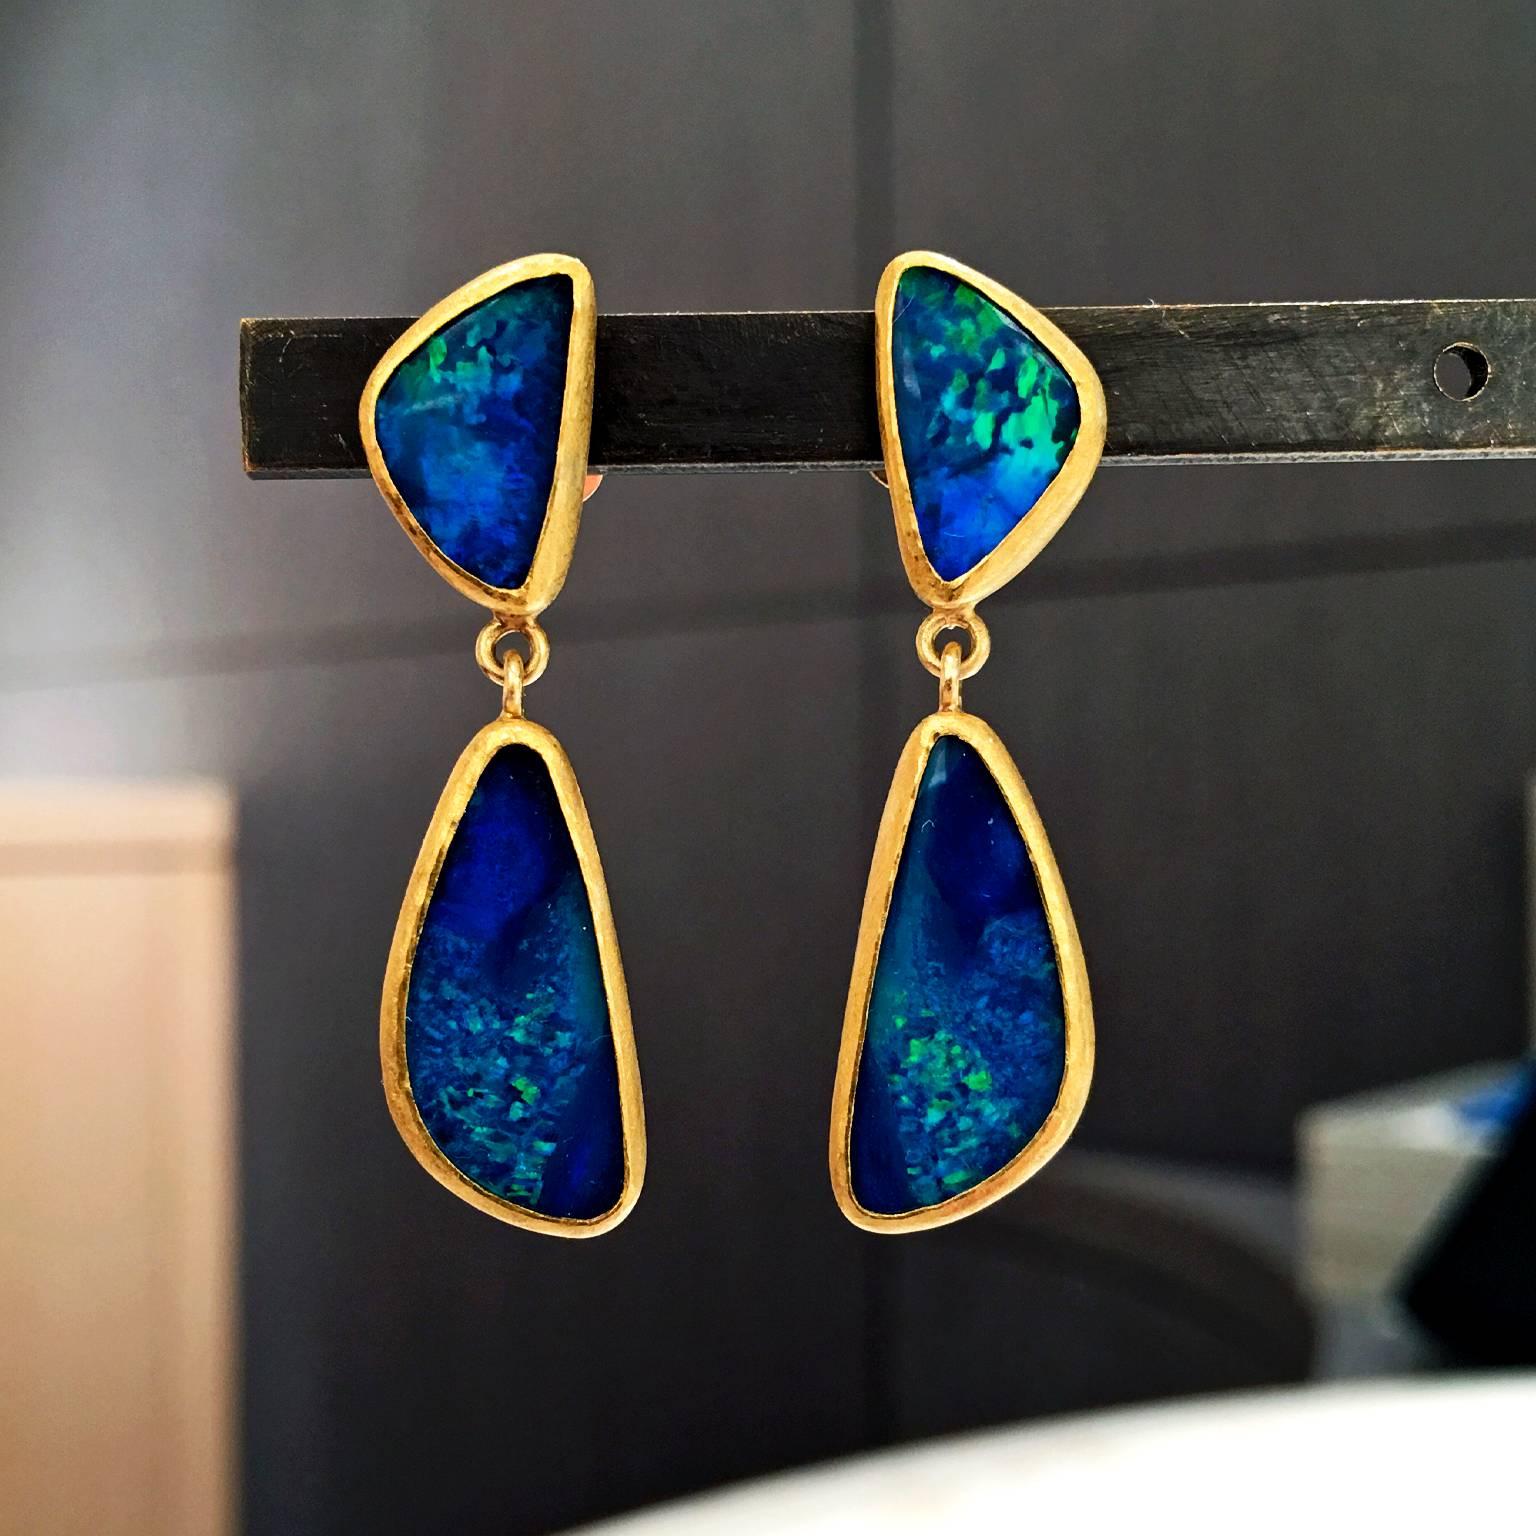 One-of-a-Kind Drop Earrings handcrafted by jewelry artist Petra Class with four matched deep blue Australian opal doublets exhibiting electric green and turquoise flash, bezel-set with Petra's signature matte 22k yellow gold finish on 18k yellow